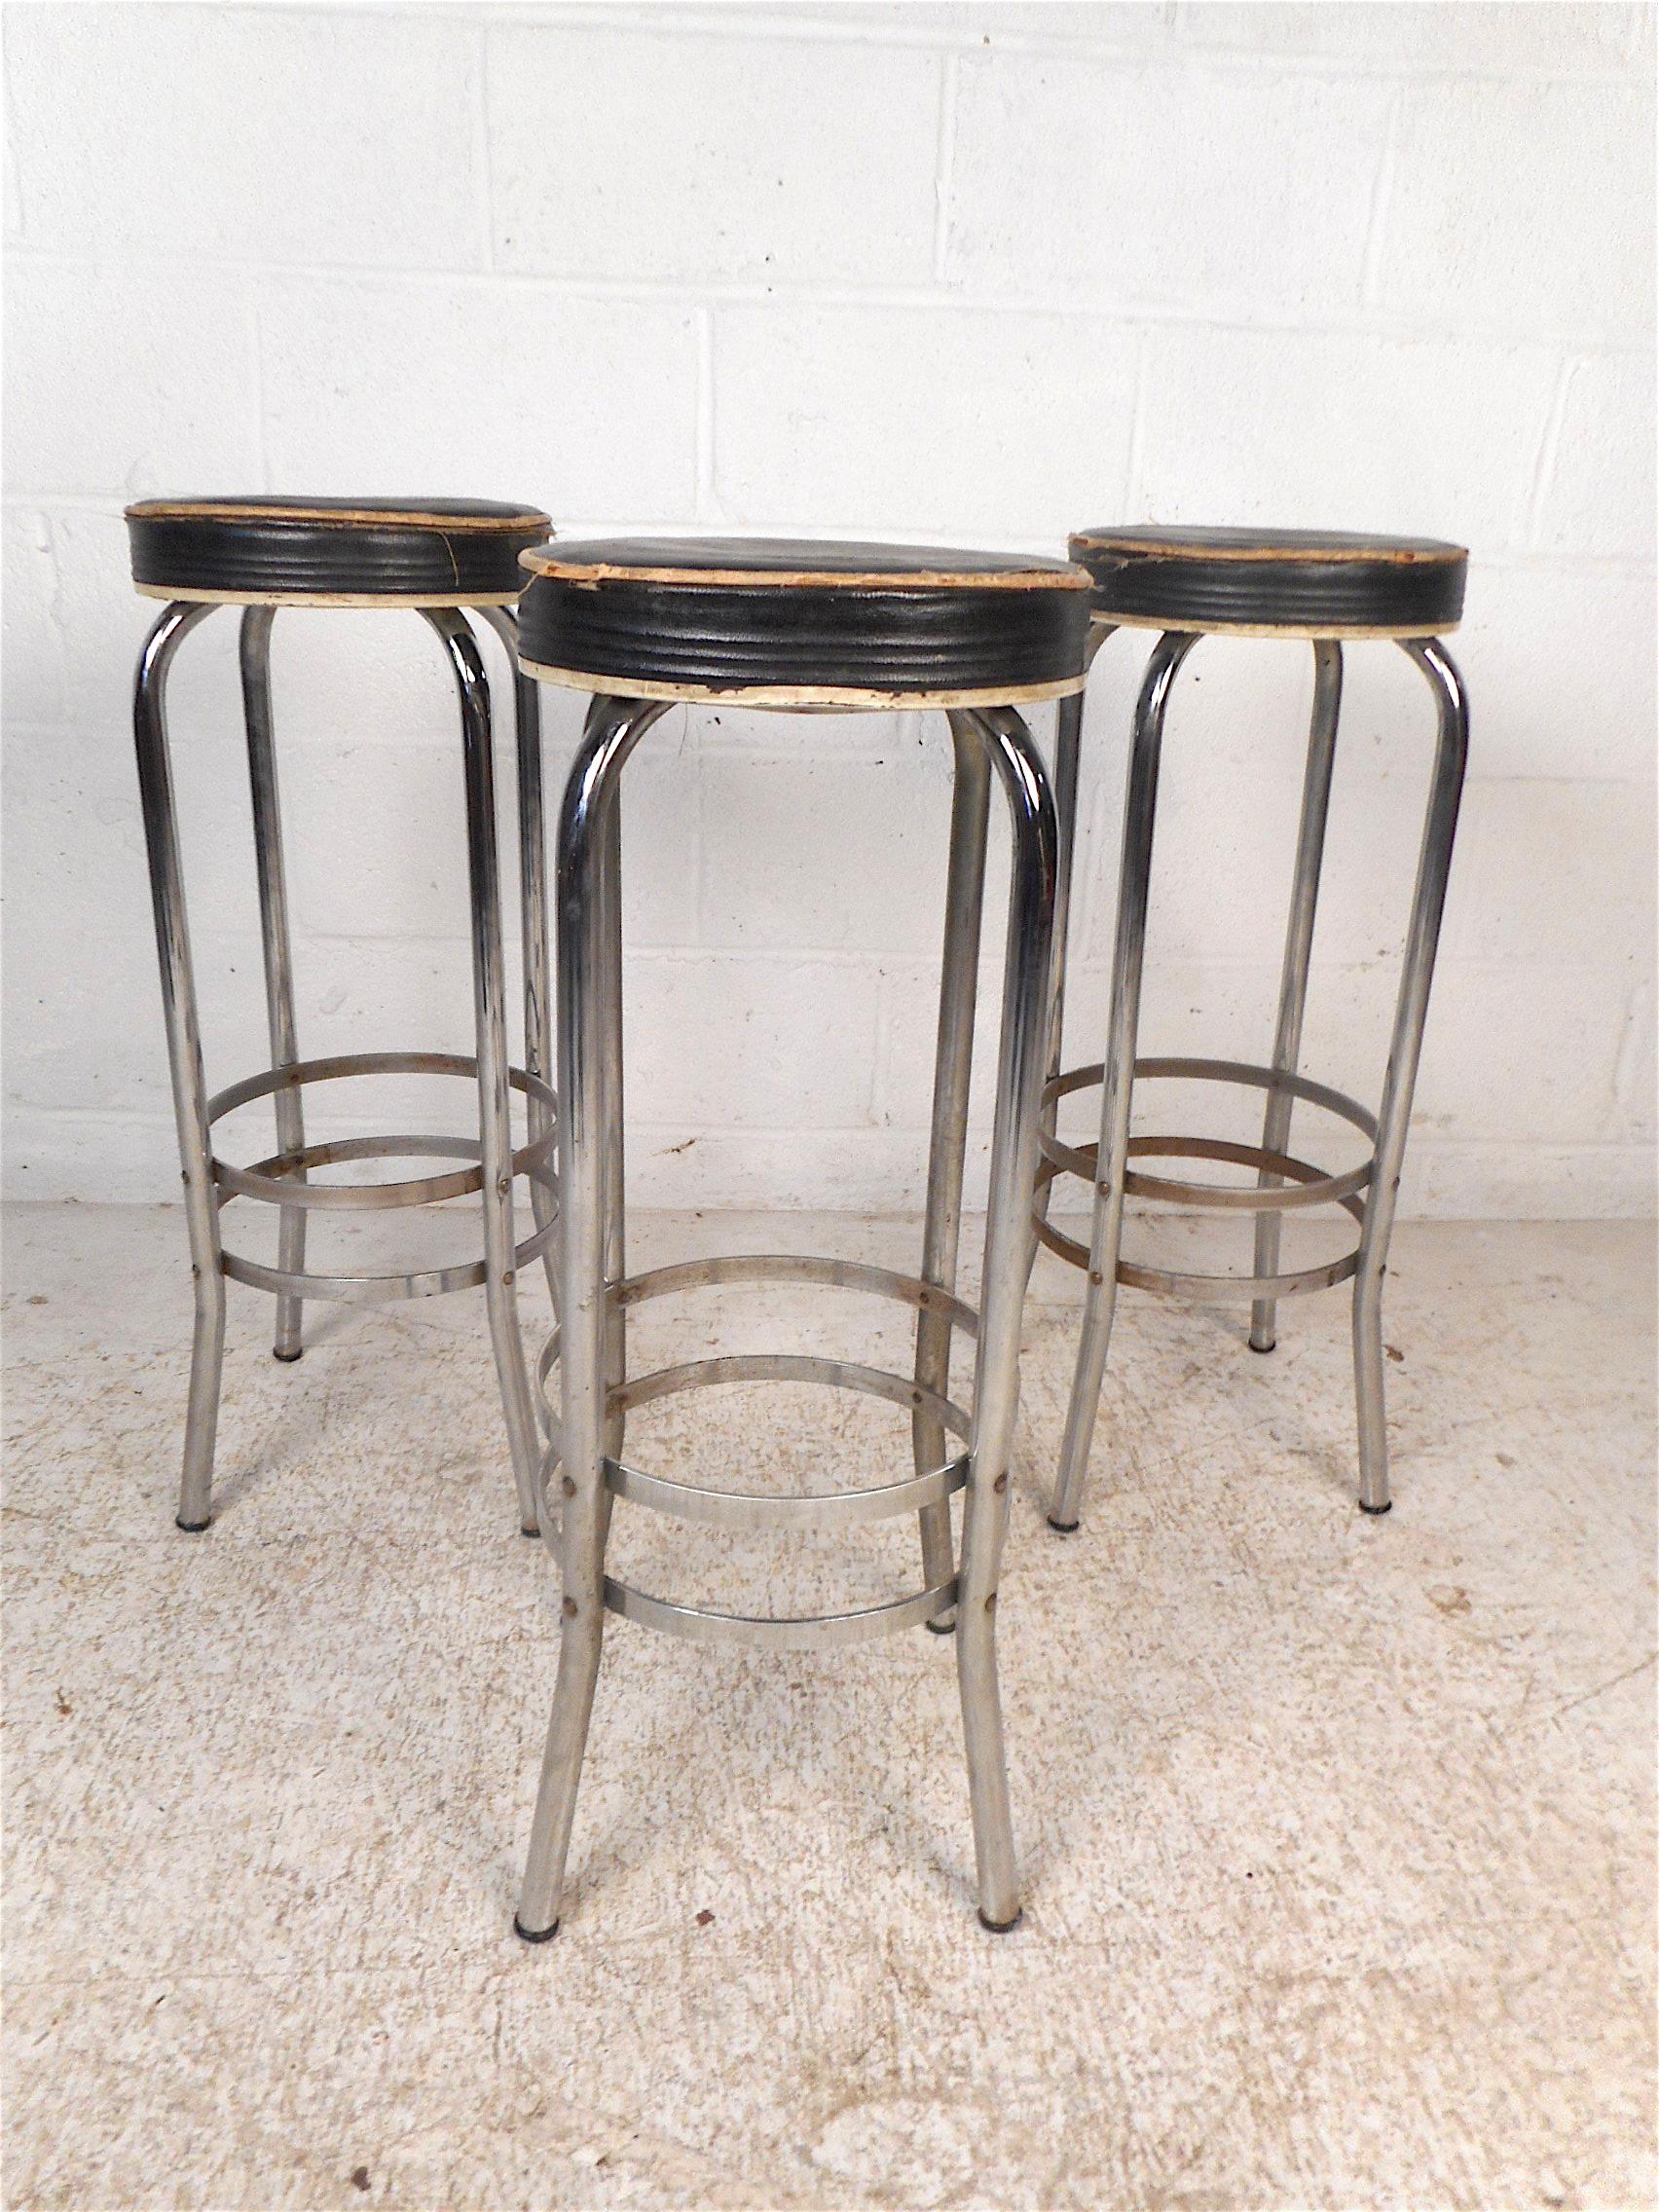 Interesting set of 3 vintage modern stools. Sleek and sturdy metal frame with footrests. This set is sure to be a great addition to any modern interior. Please confirm item location with dealer (NJ or NY).